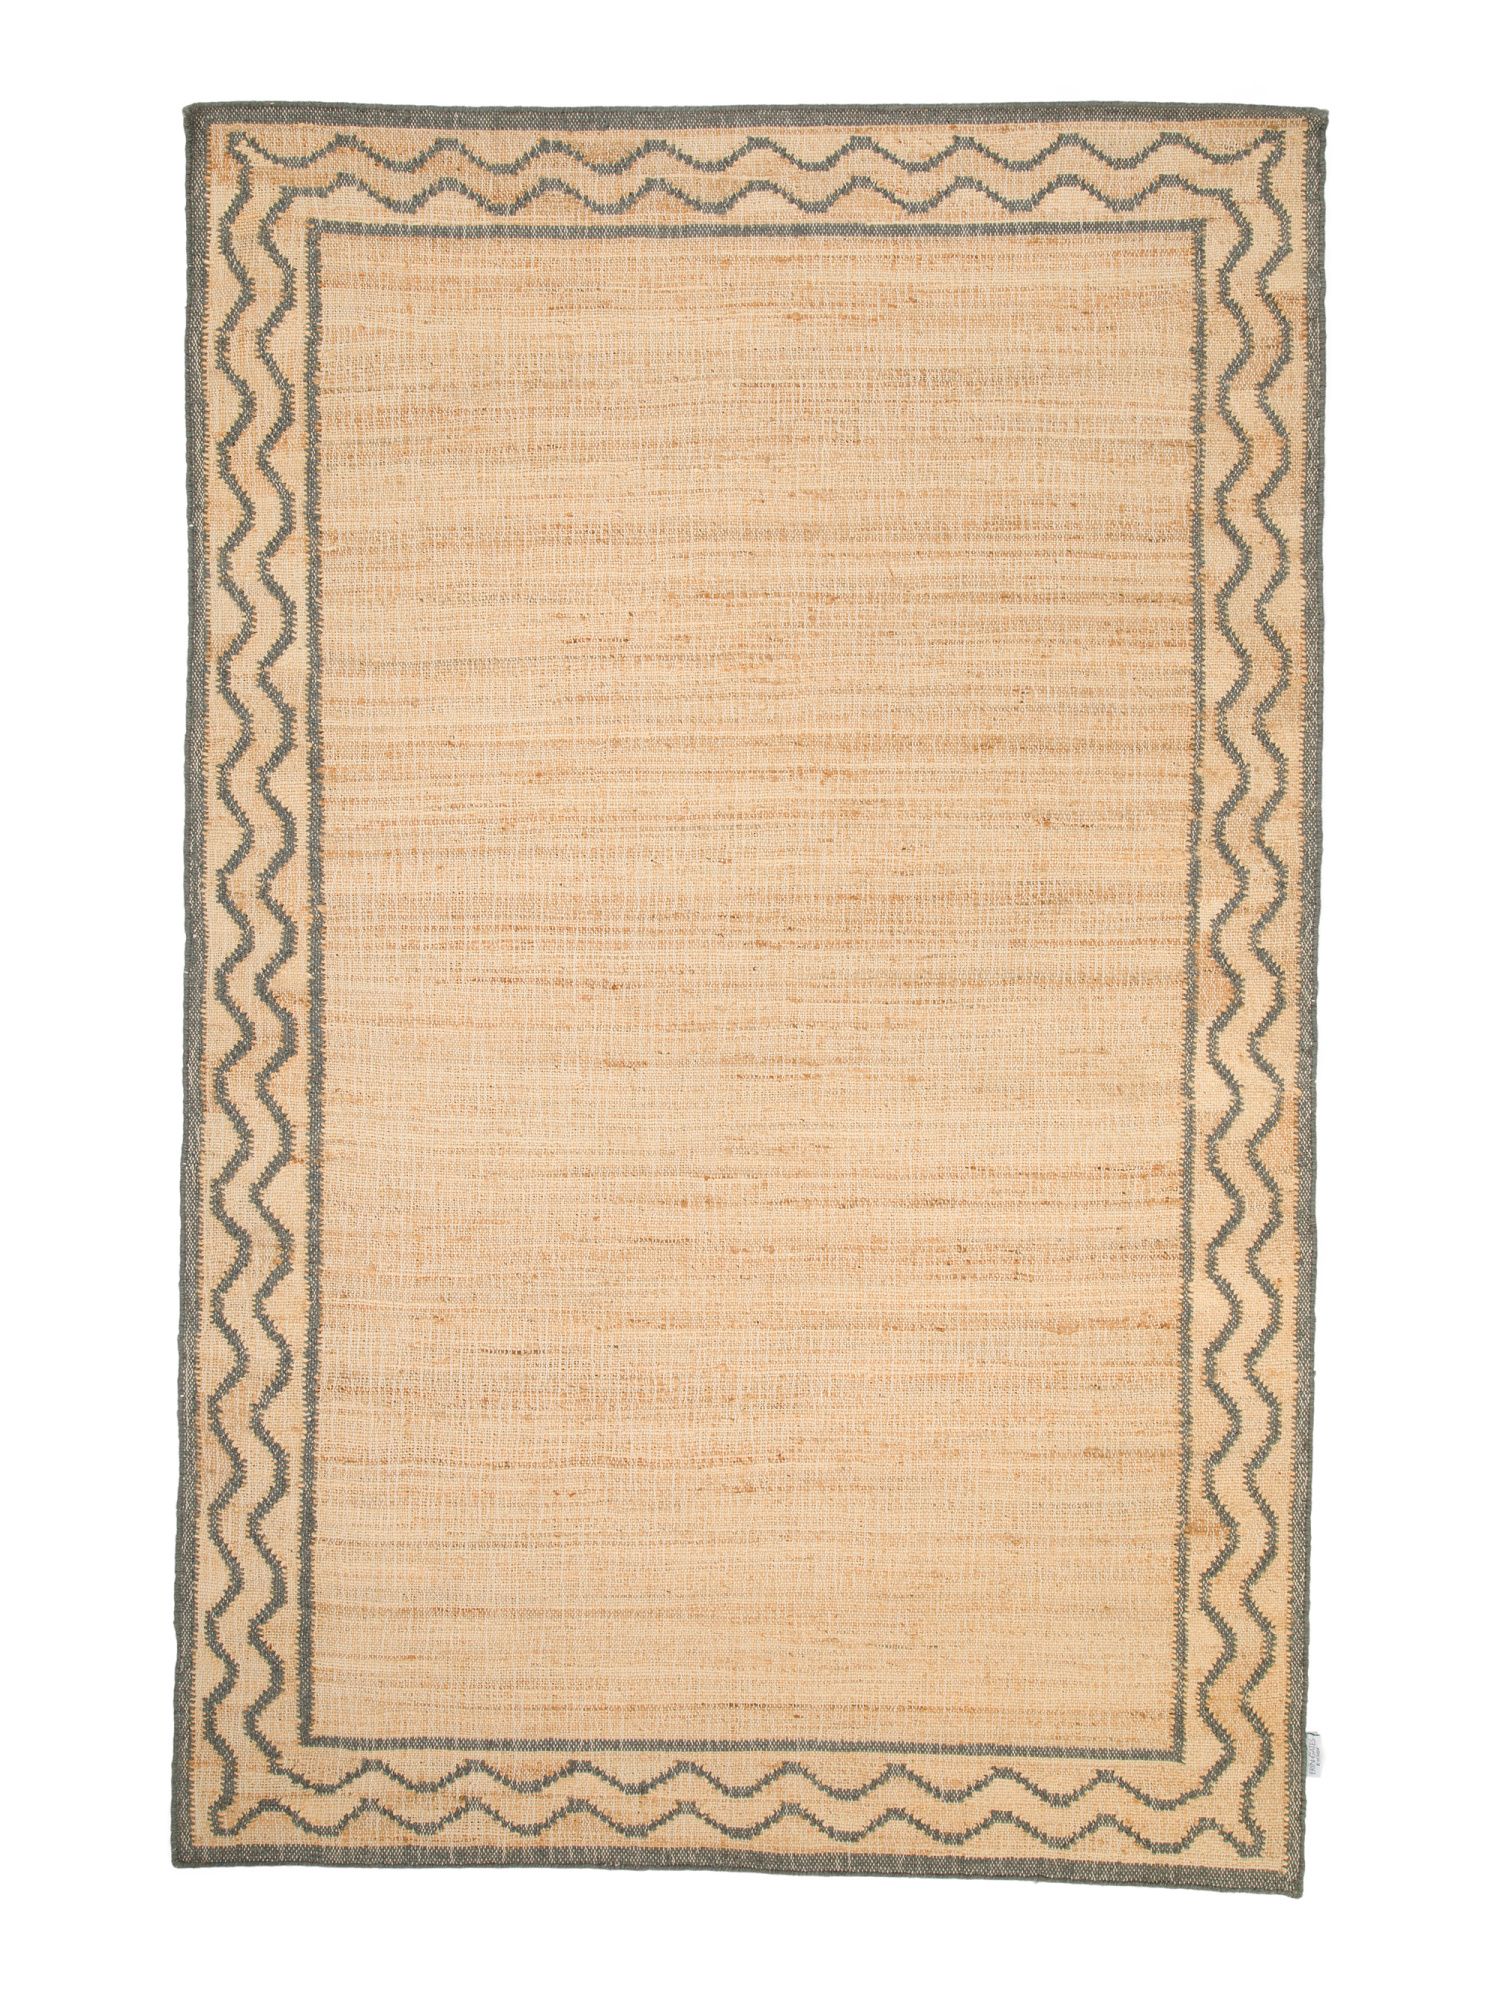 5x8 Hand Woven Wool And Jute Blend Area Rug | TJ Maxx